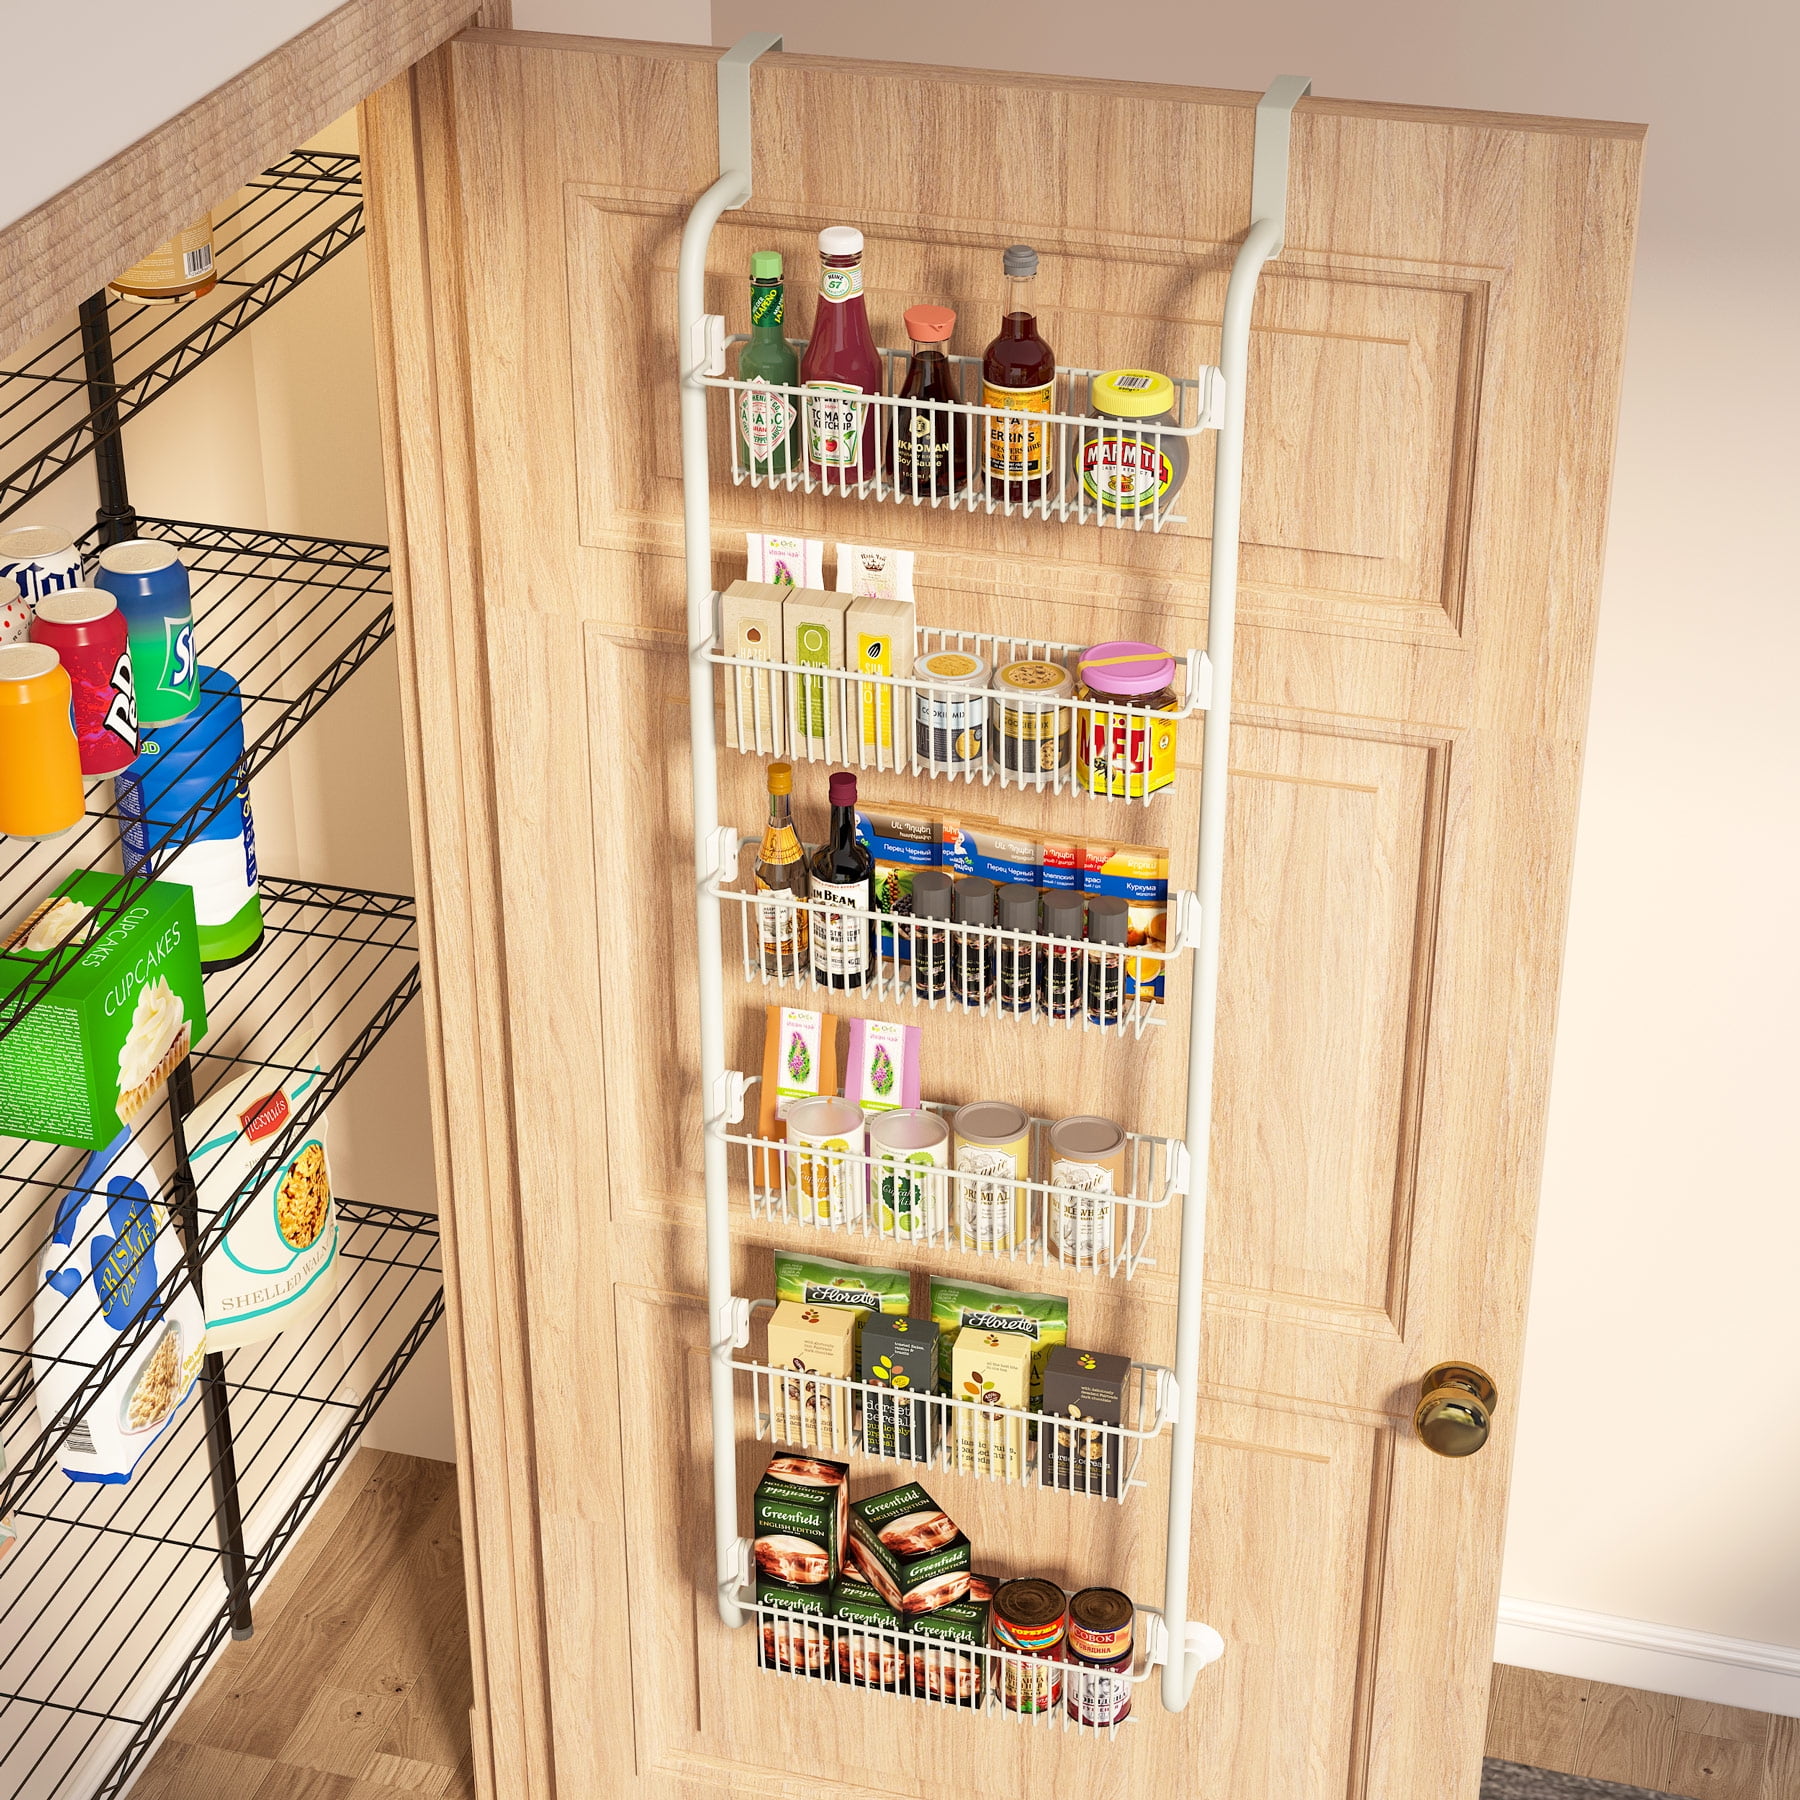 6-Tier Over-The-Door Metal and Plastic Pantry Organizer with 6 Full Baskets